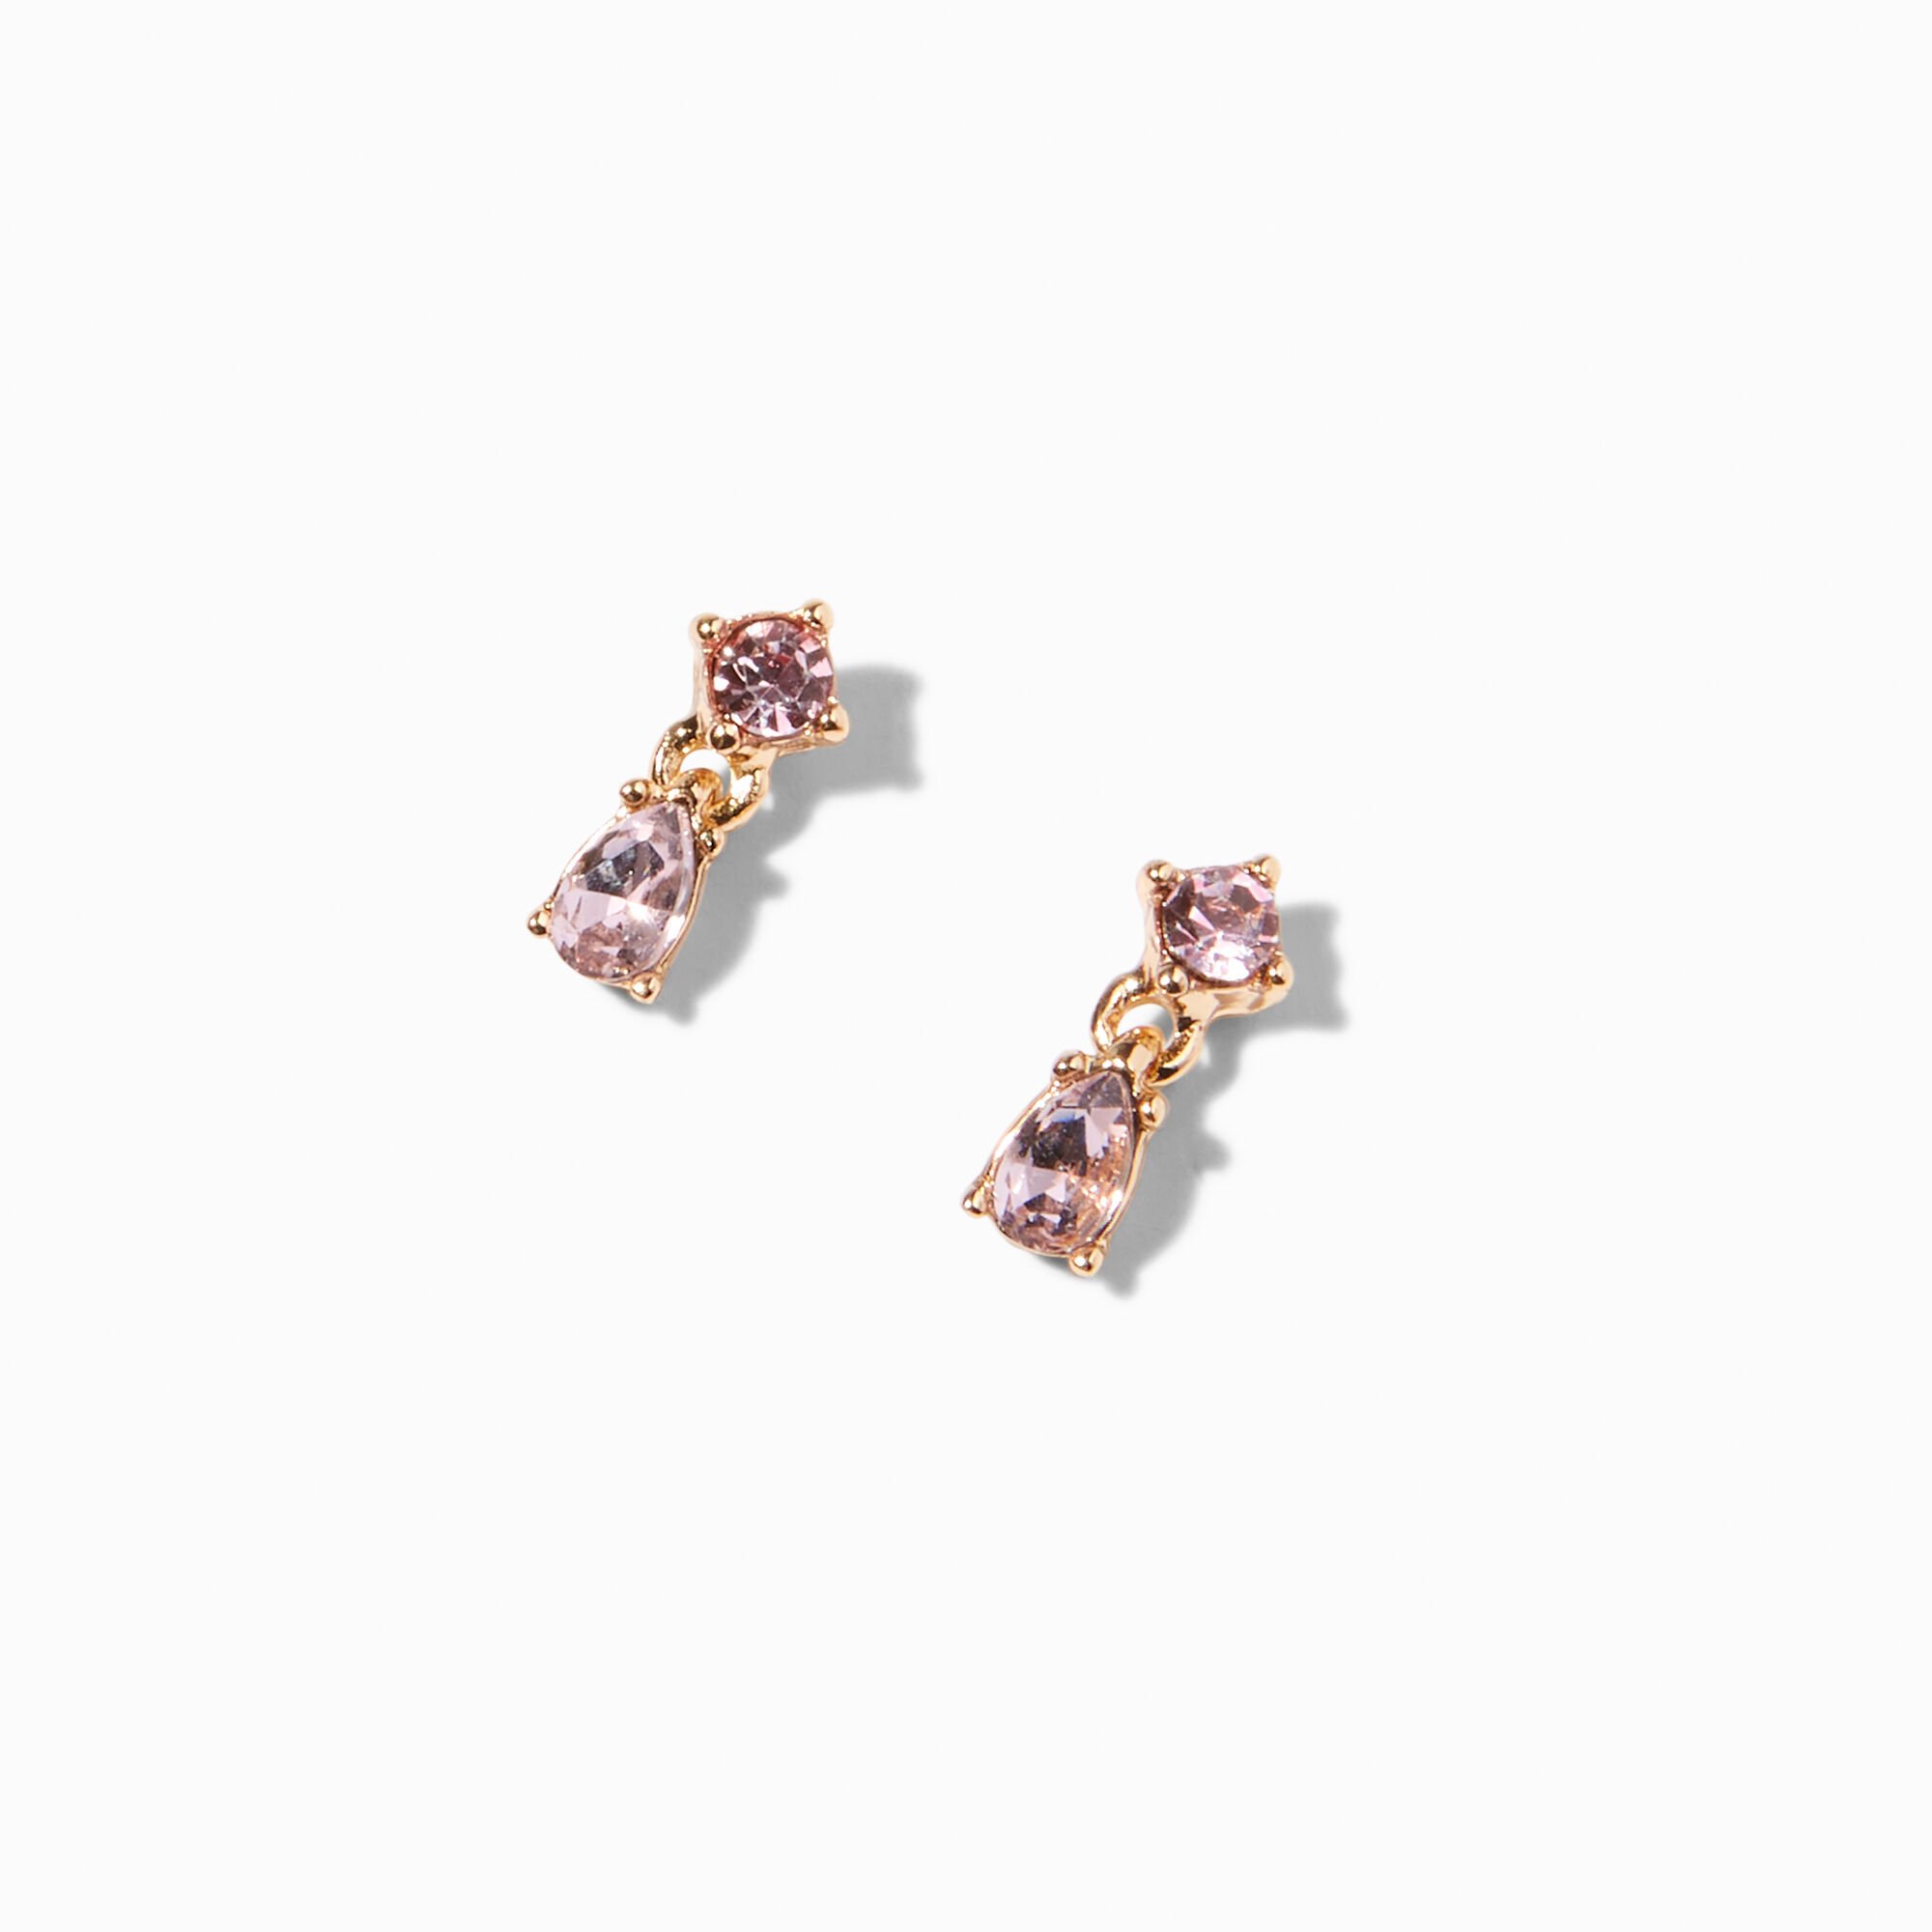 View Claires Blush Crystal Square GoldTone Stud Earrings Pink information